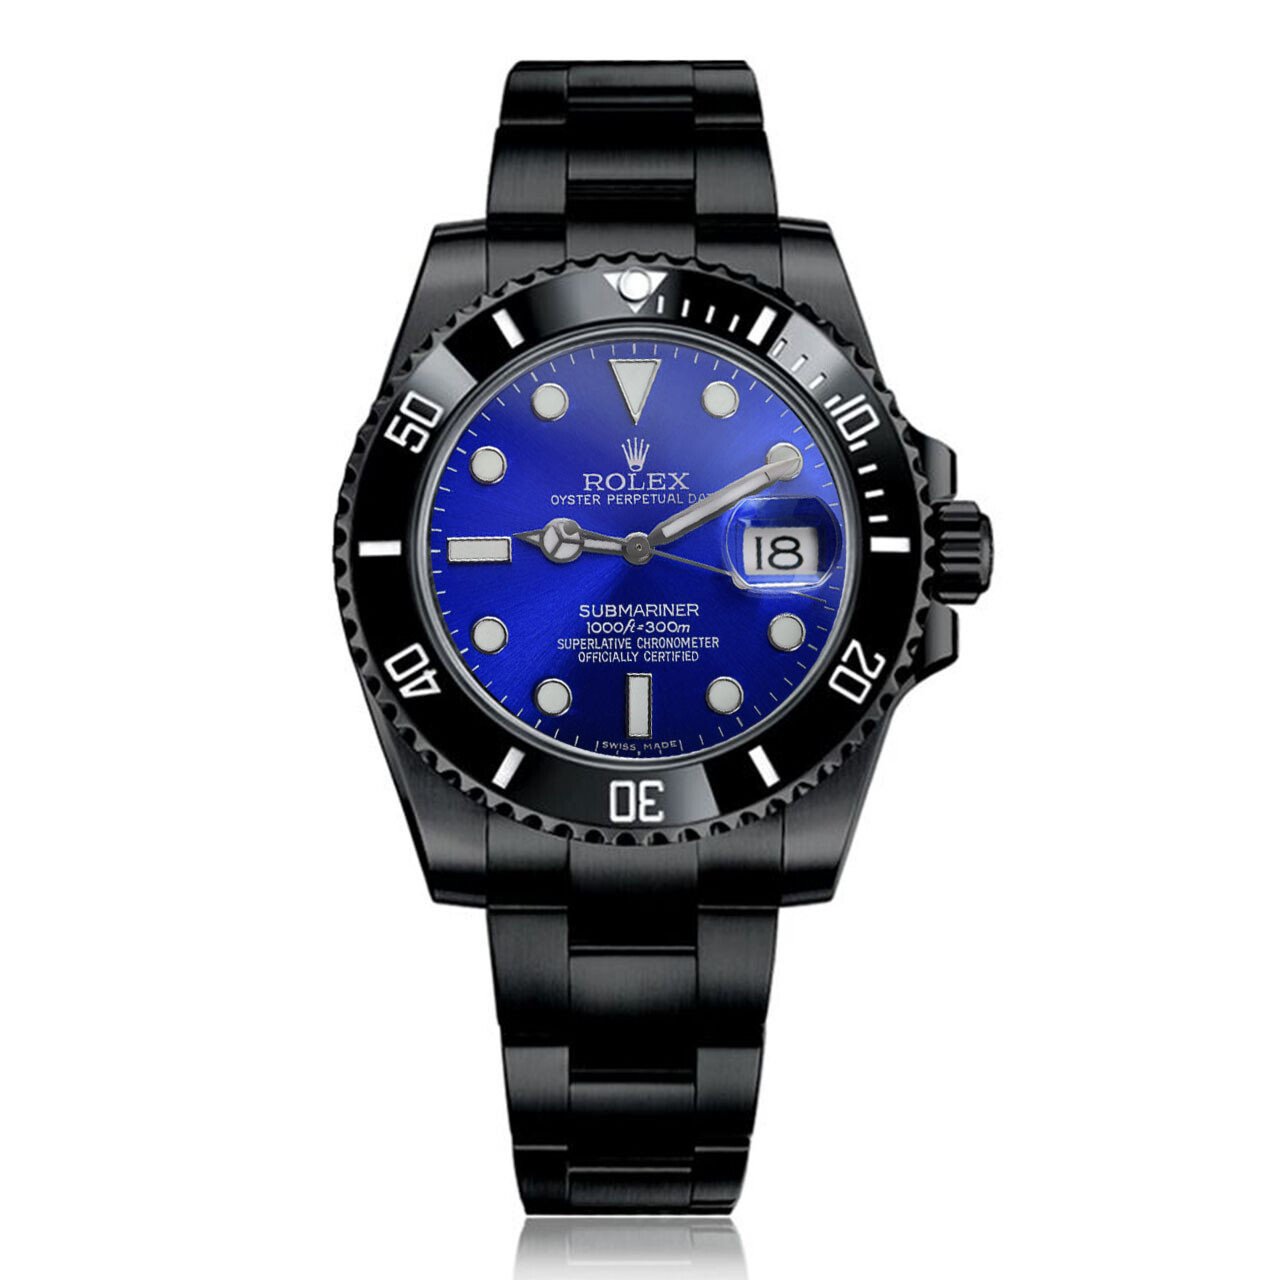 Rolex Yacht Master 40mm Pvd/Dlc Coated In New York, New York, United States  For Sale (13006220)